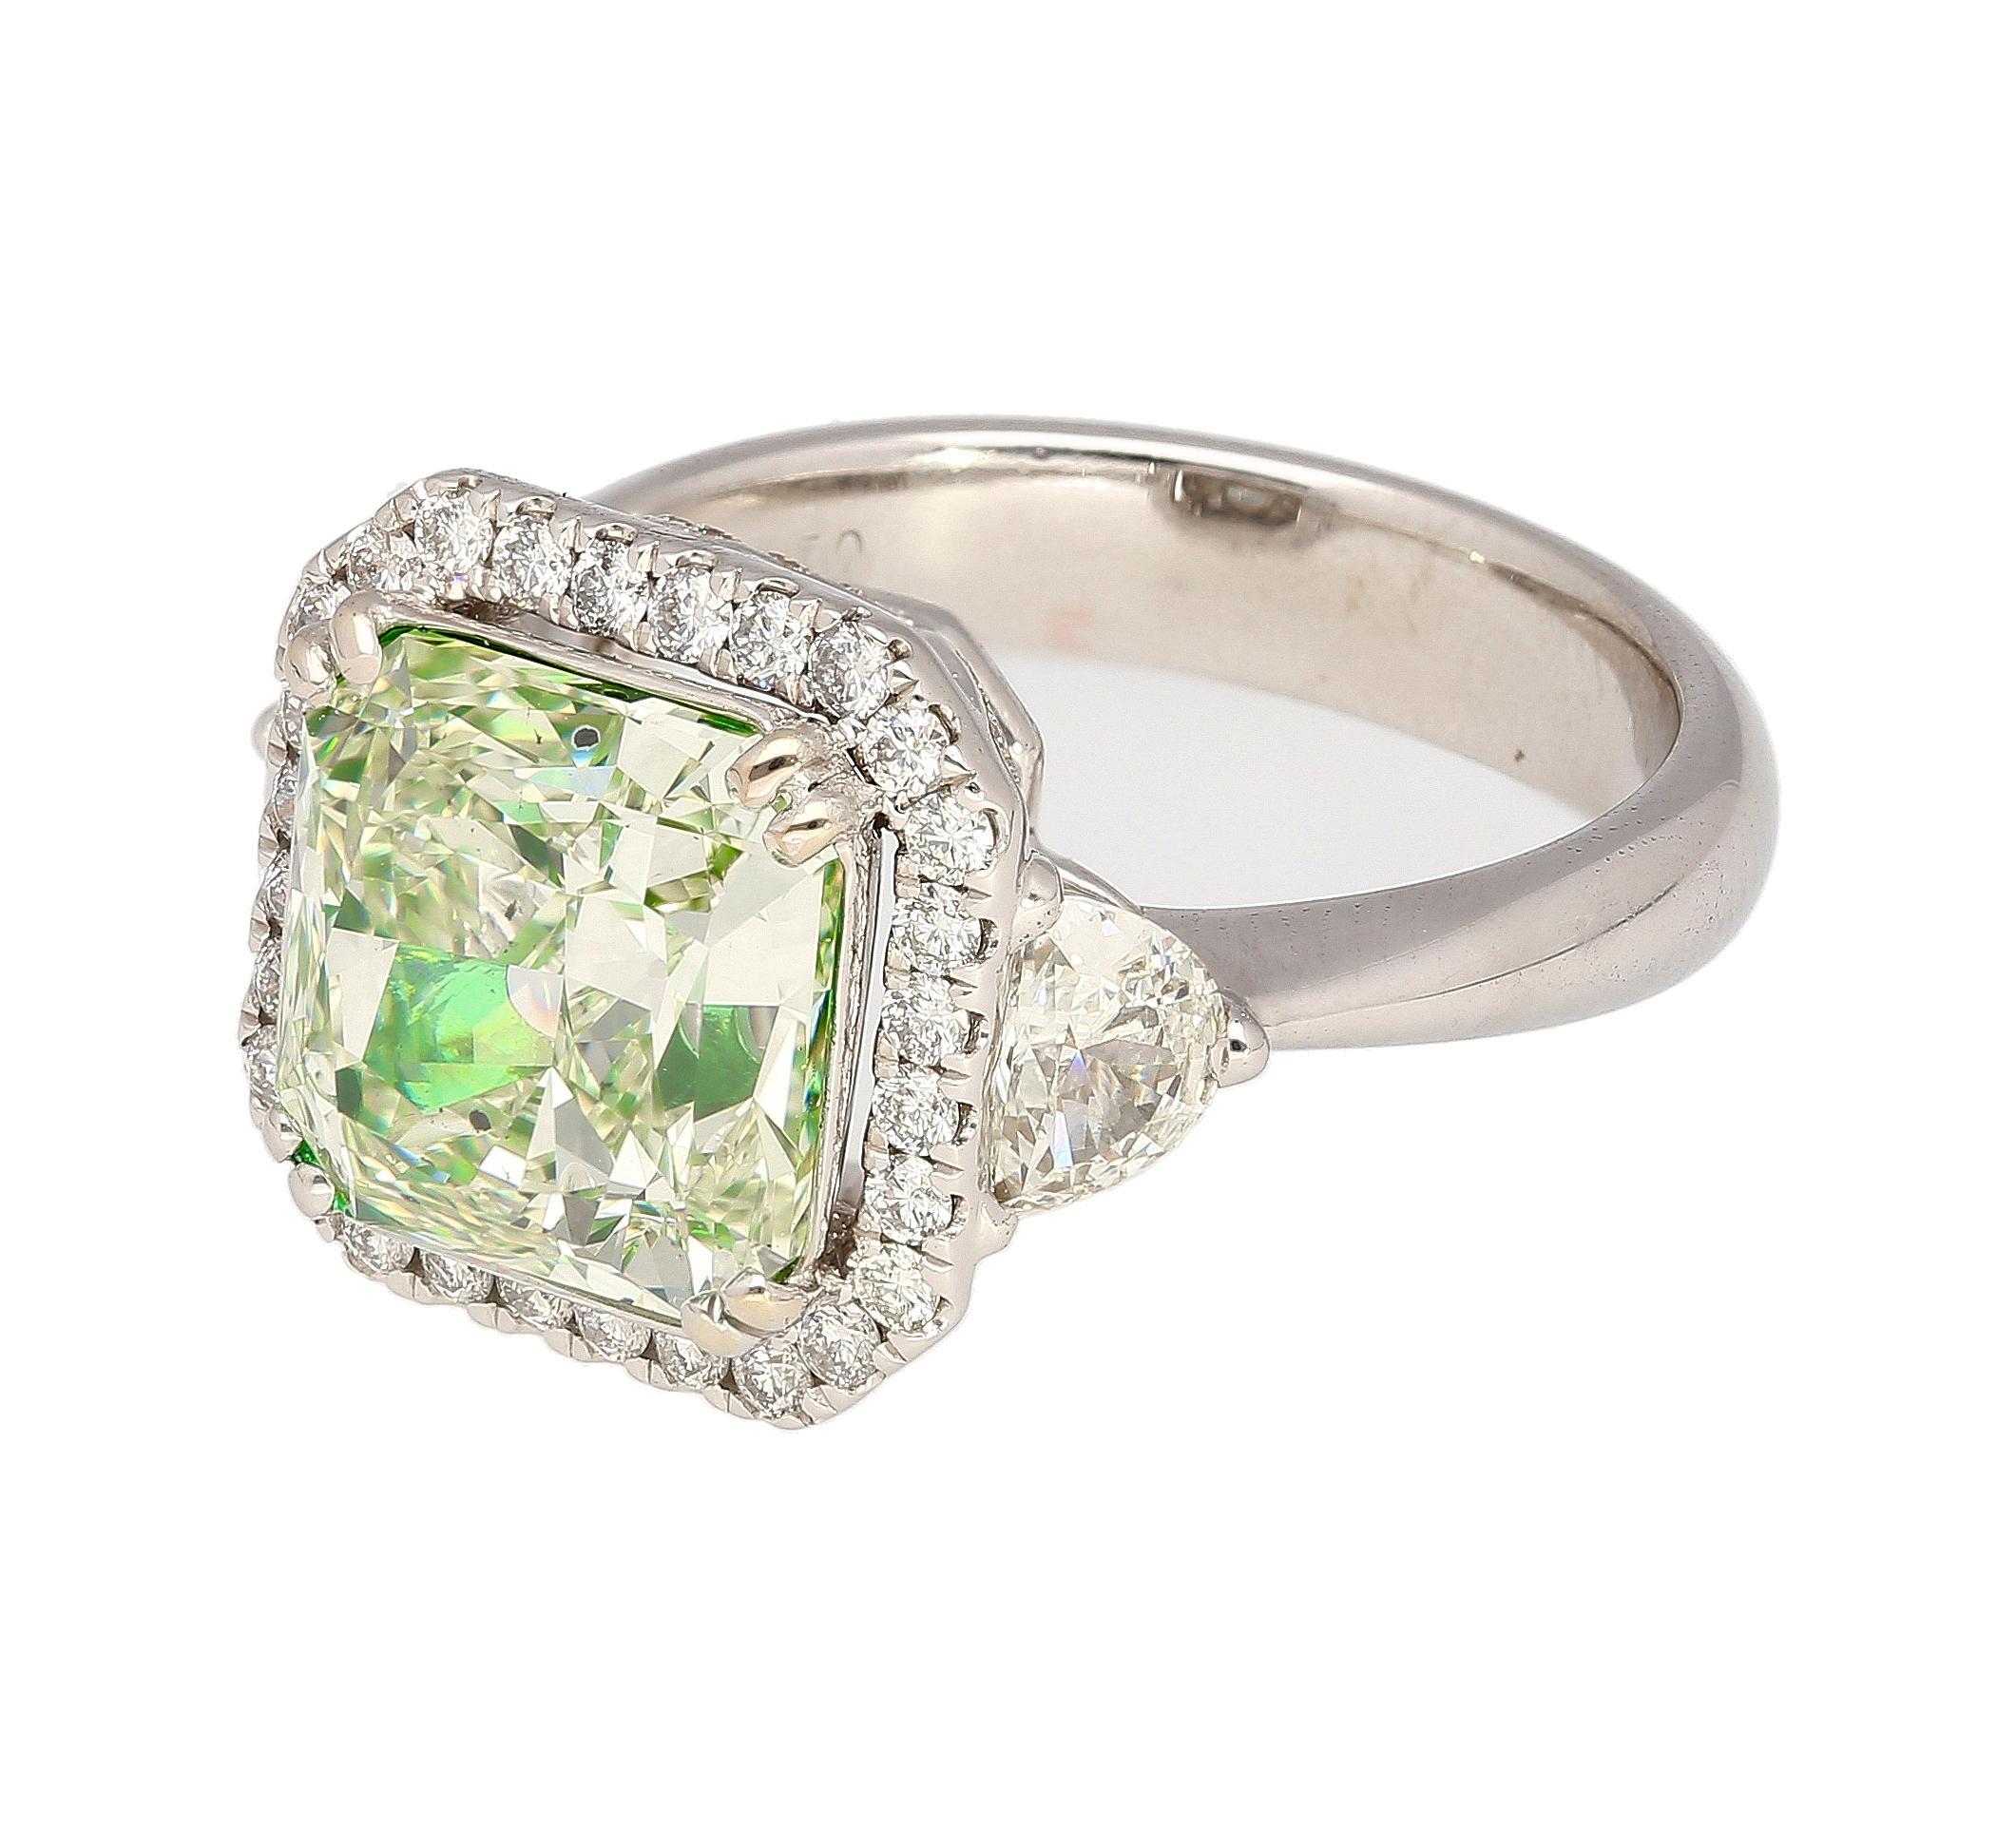 4.26 Carat Radiant Cut Fancy Yellowish Green SI1 Clarity 18K GIA Diamond Ring In Good Condition For Sale In Miami, FL